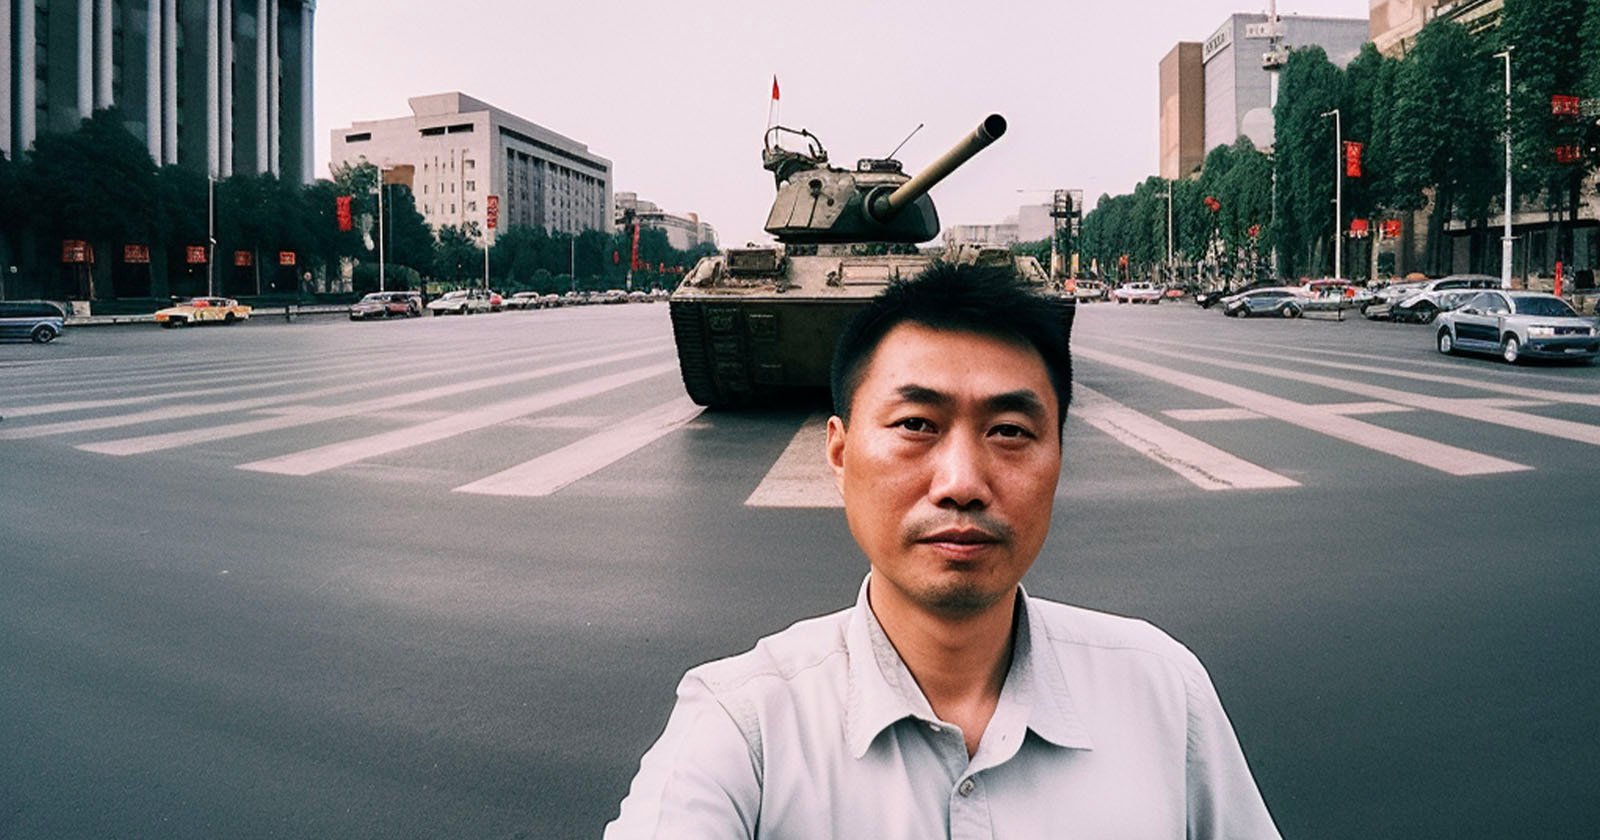 AI Image of Tiananmen Squares Tank Man Rises to the Top of Google Search